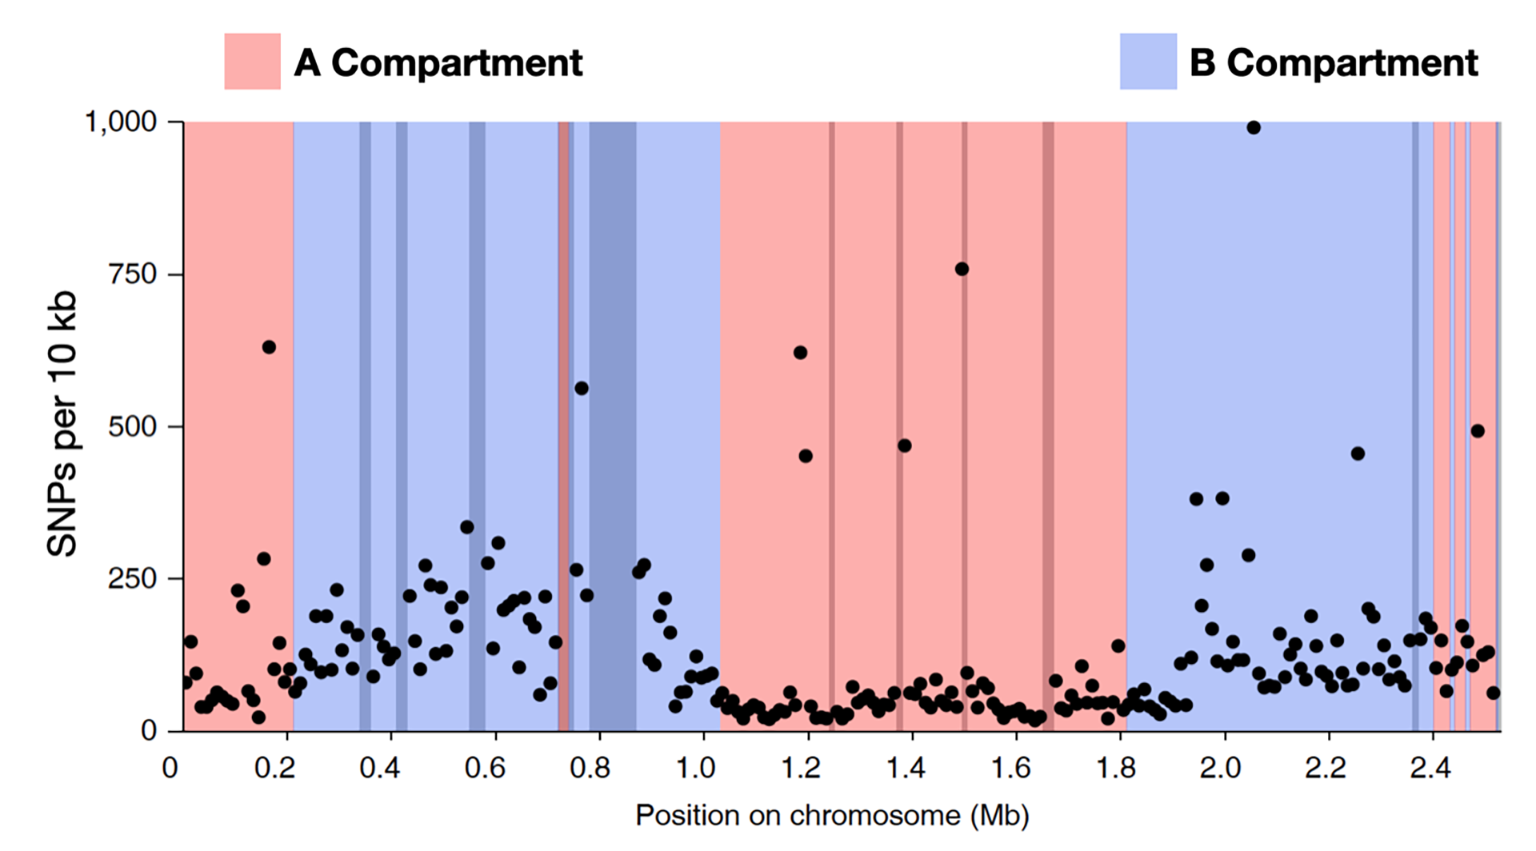 A linear representation of the Sulfolobus islandicus REY15A chromosome with the positions of A and B compartment domains indicated in red and blue respectively. Mutation rates as revealed by single nucleotide polymorphisms (SNPs) are represented on the y-axis.